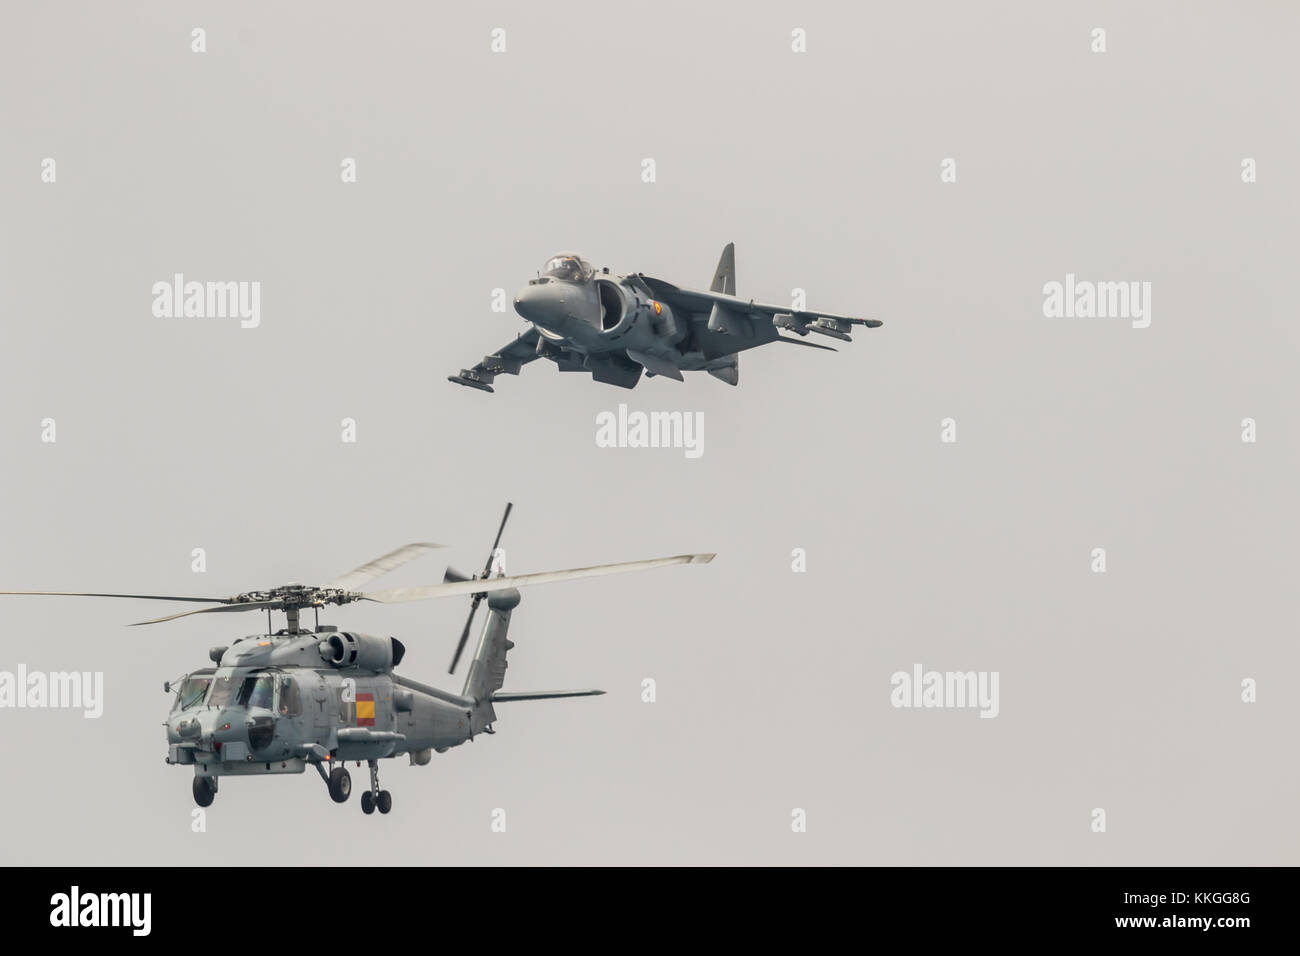 MOTRIL, GRANADA, SPAIN-JUN 09: Aircraft AV-8B Harrier Plus and  helicopter SH-60 Seahawk taking part in an exhibition on the 12th international airsho Stock Photo